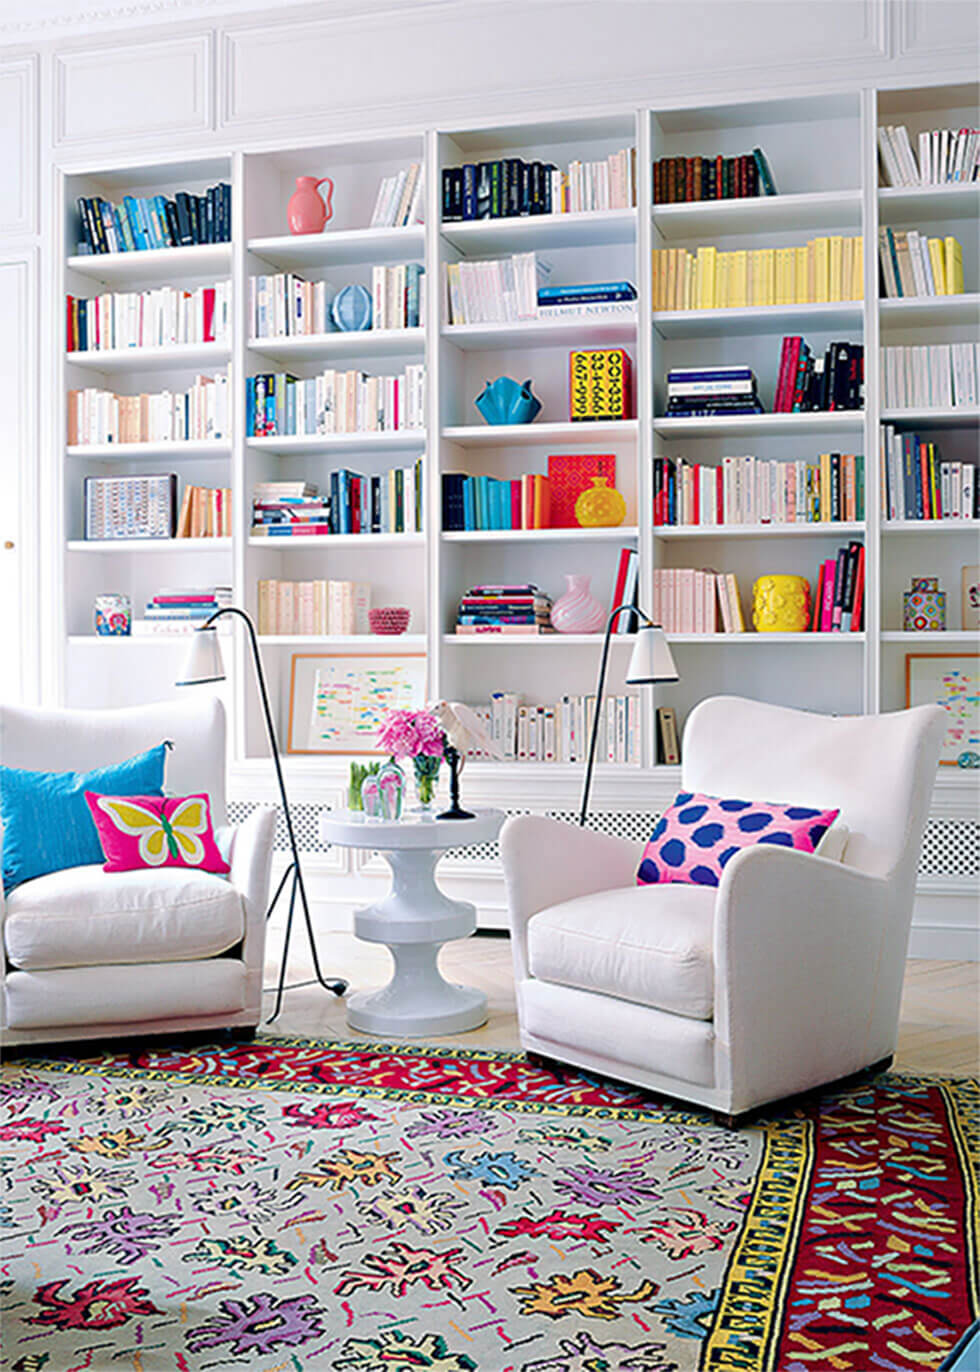 Living room with white armchairs and bookshelves, with colourful rug, cushion and decor.